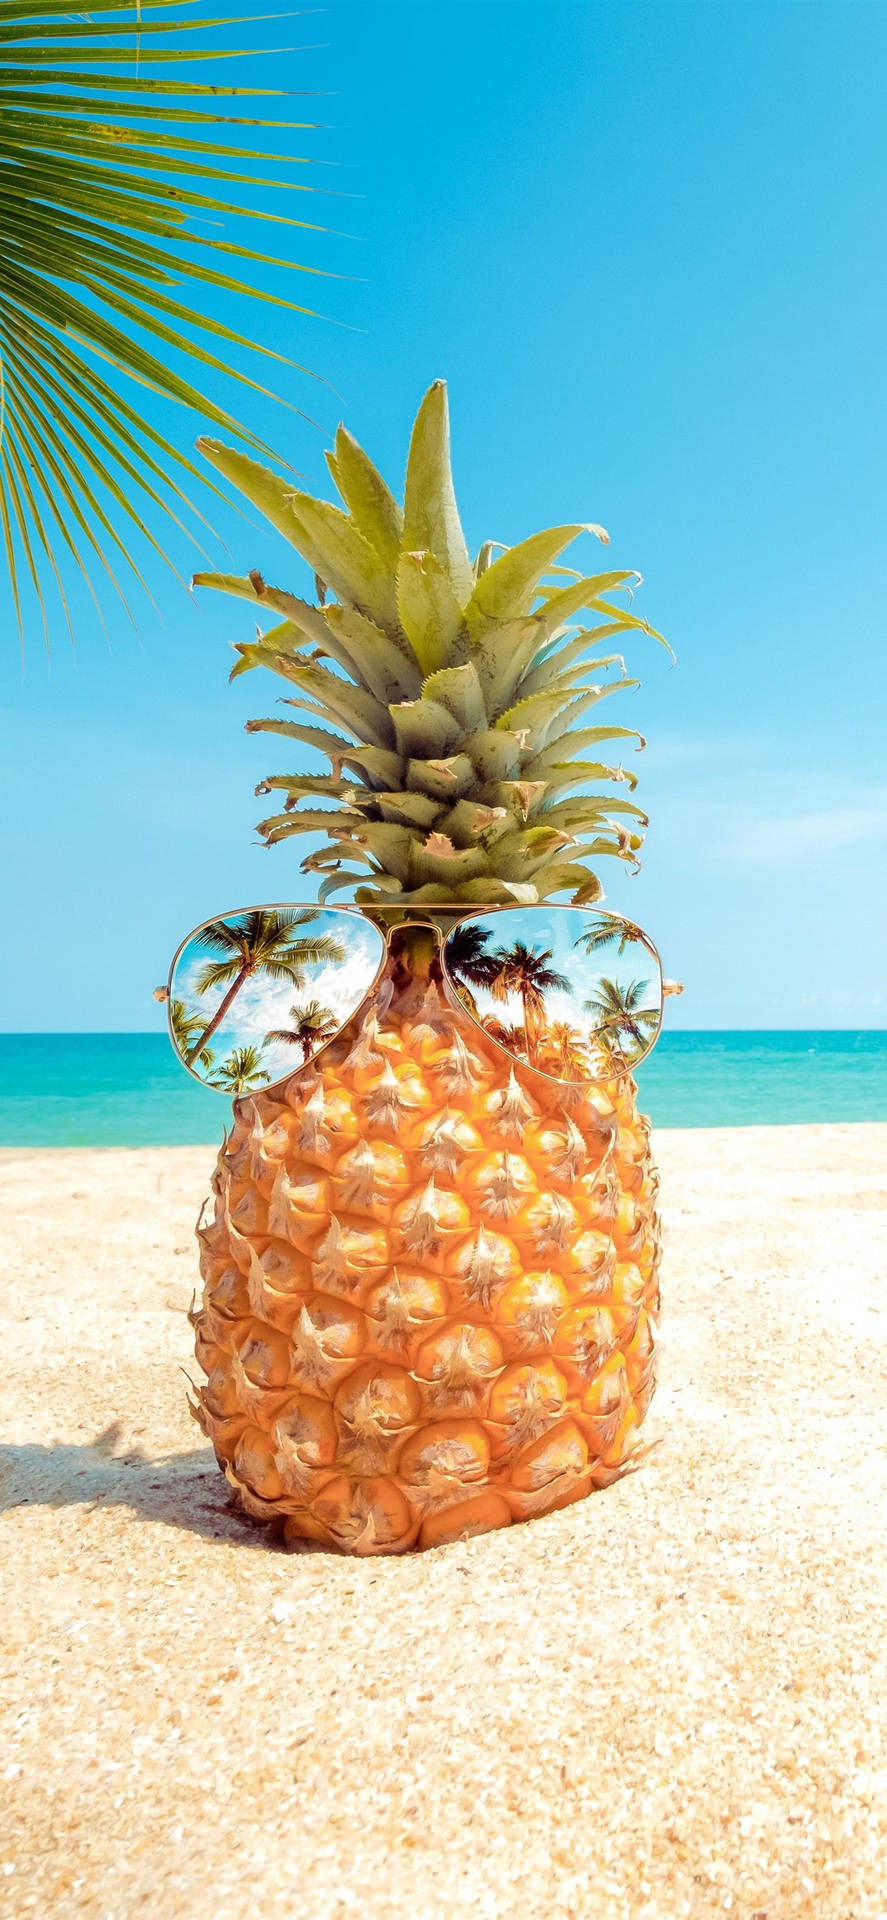 Invest In the Best with the Pineapple Iphone Wallpaper